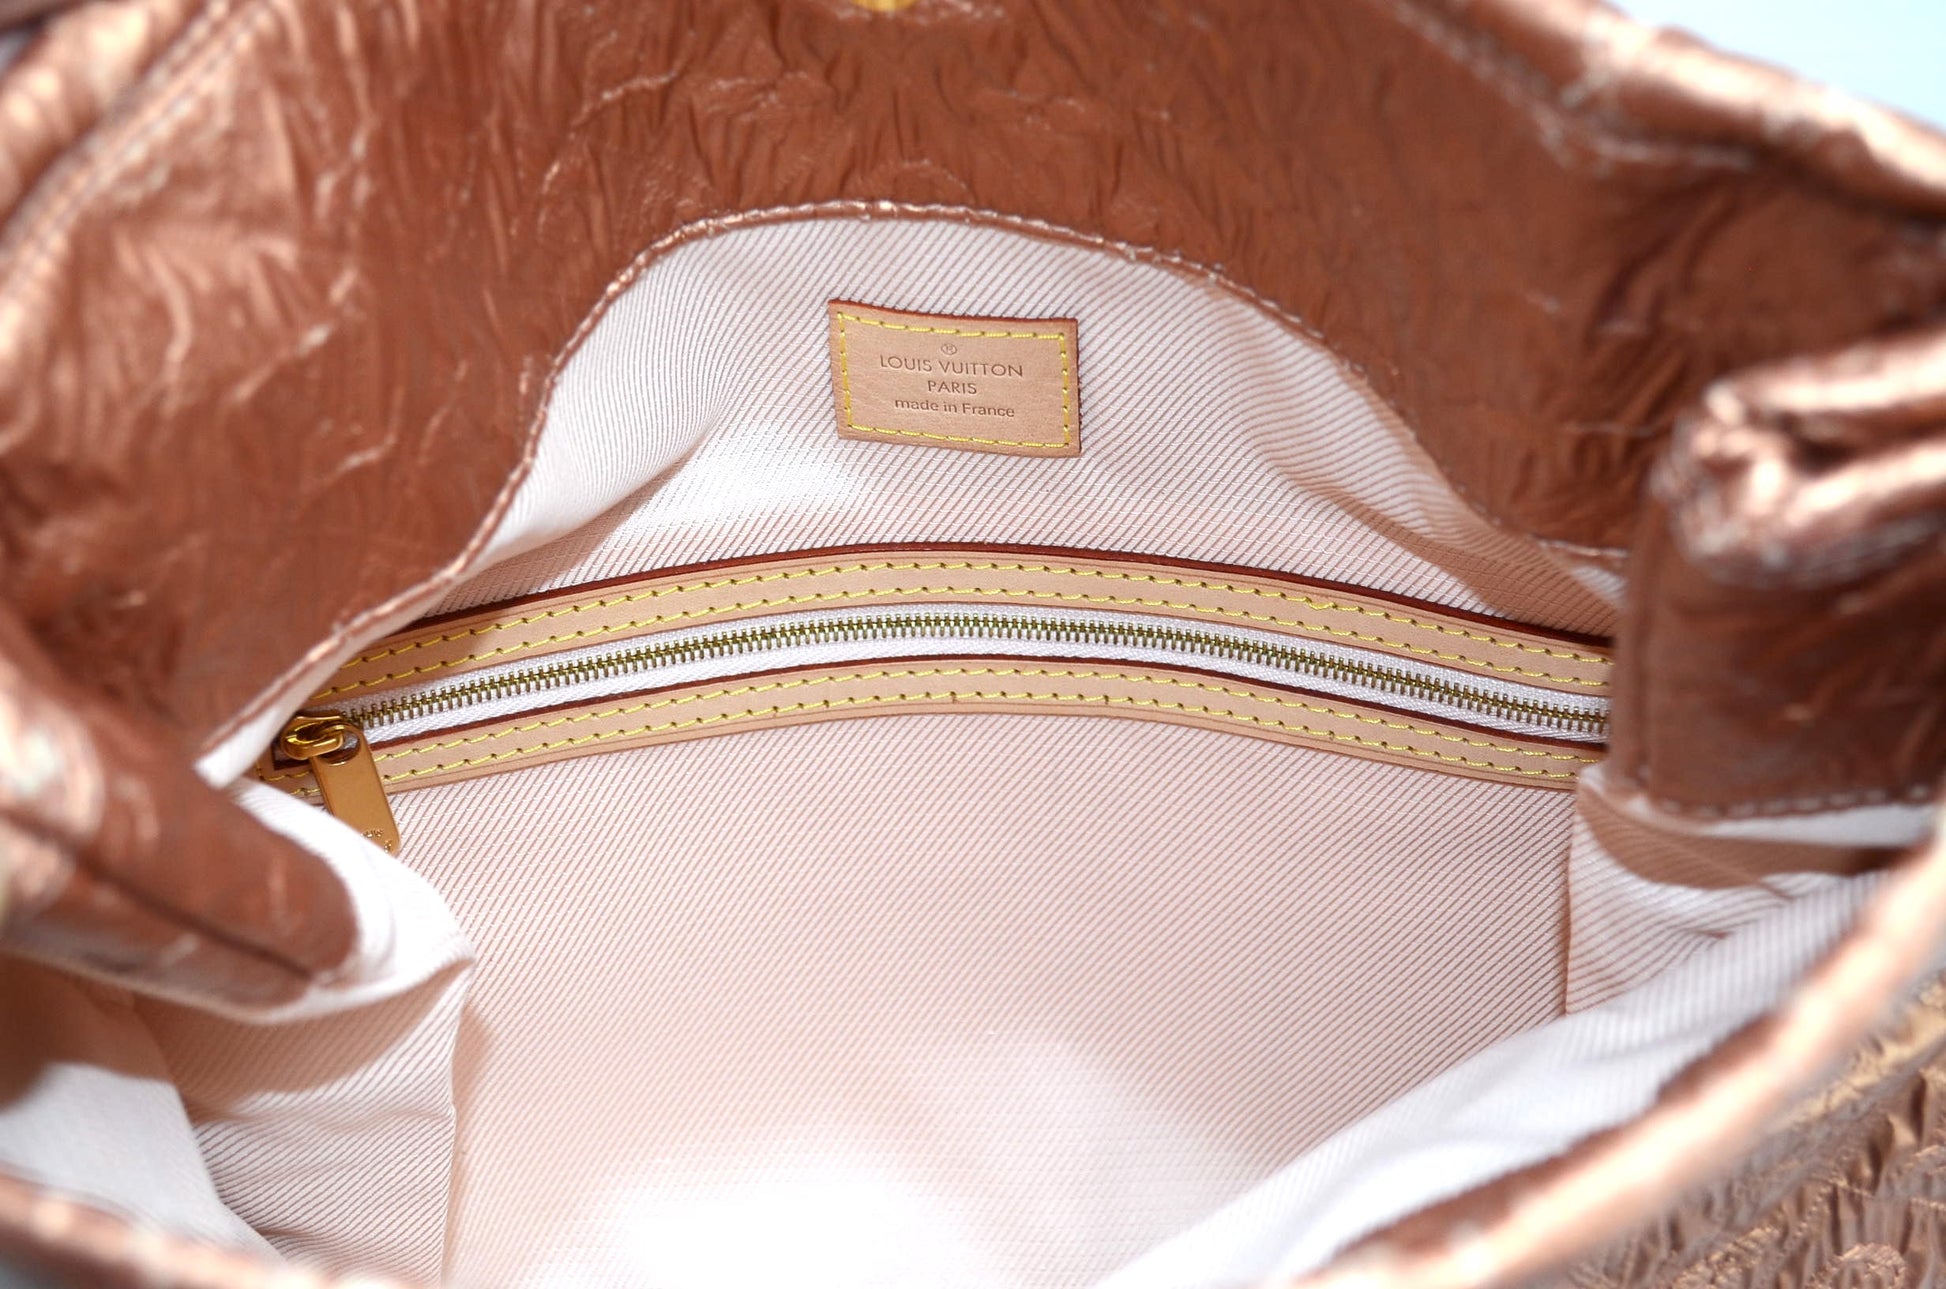 Louis Vuitton Limelight rosegold fold over Clutch